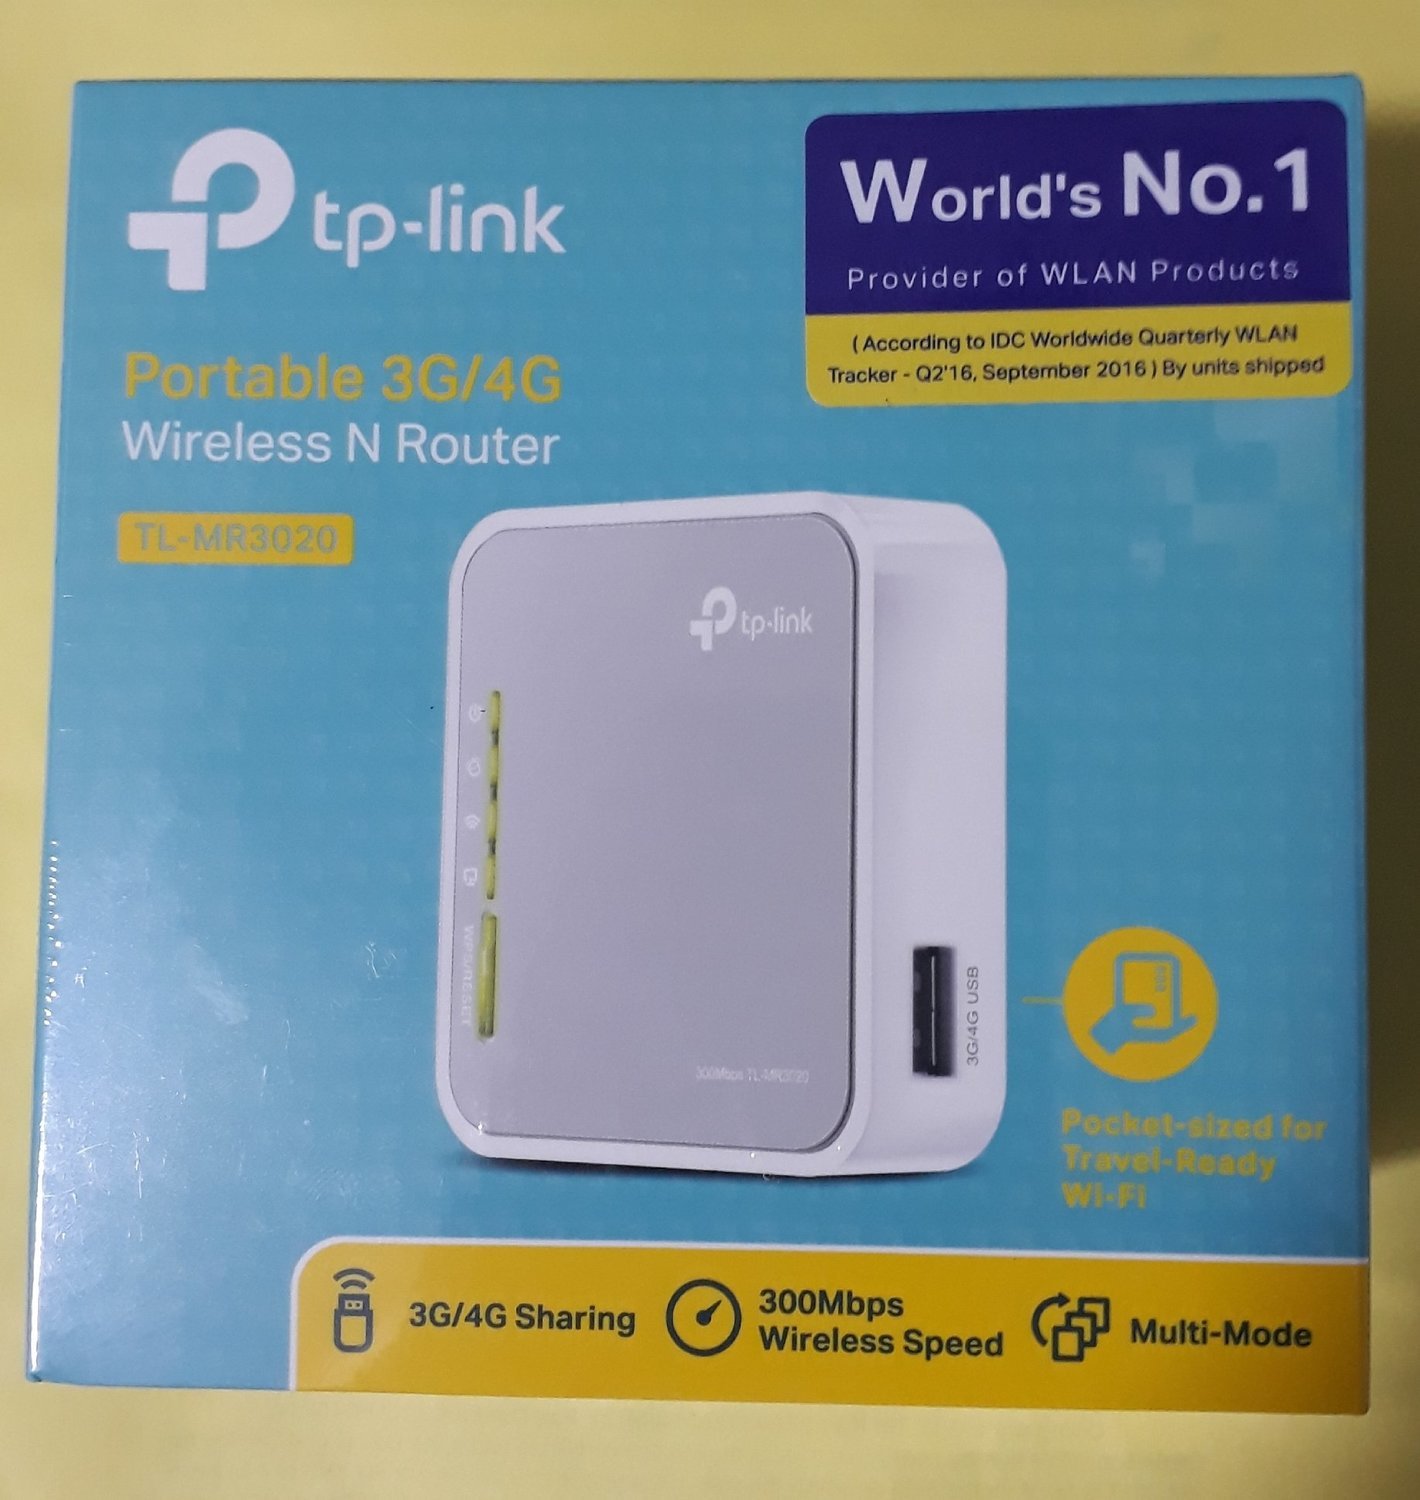 TP-Link MR3020 Portable 3G/4G Wireless N Router - Rs.1100